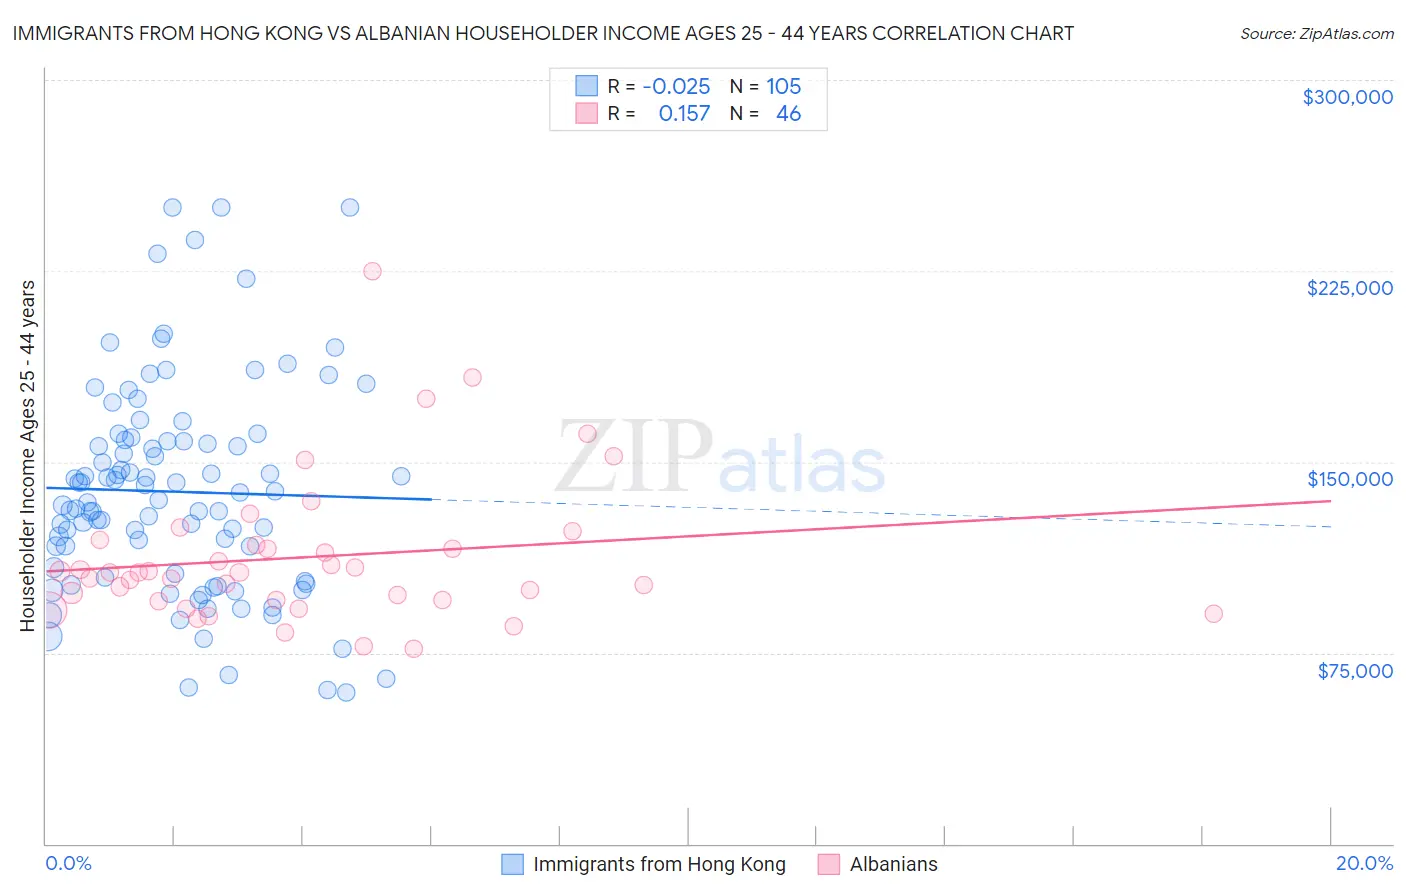 Immigrants from Hong Kong vs Albanian Householder Income Ages 25 - 44 years